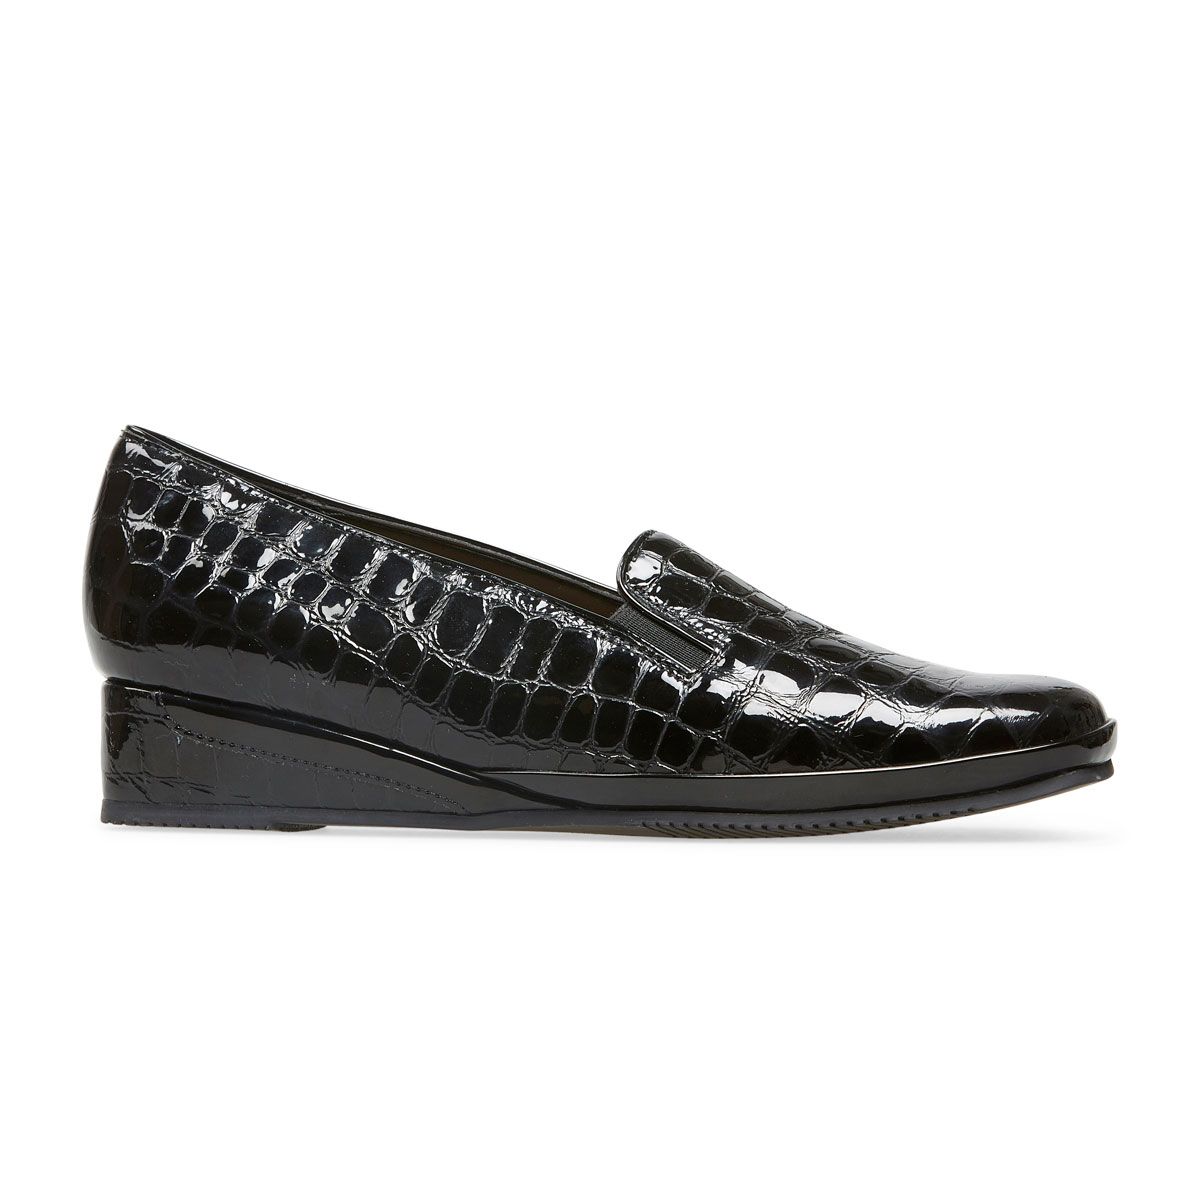 Van Dal Shoes - Rochester II Wedges in Black Patent Croc